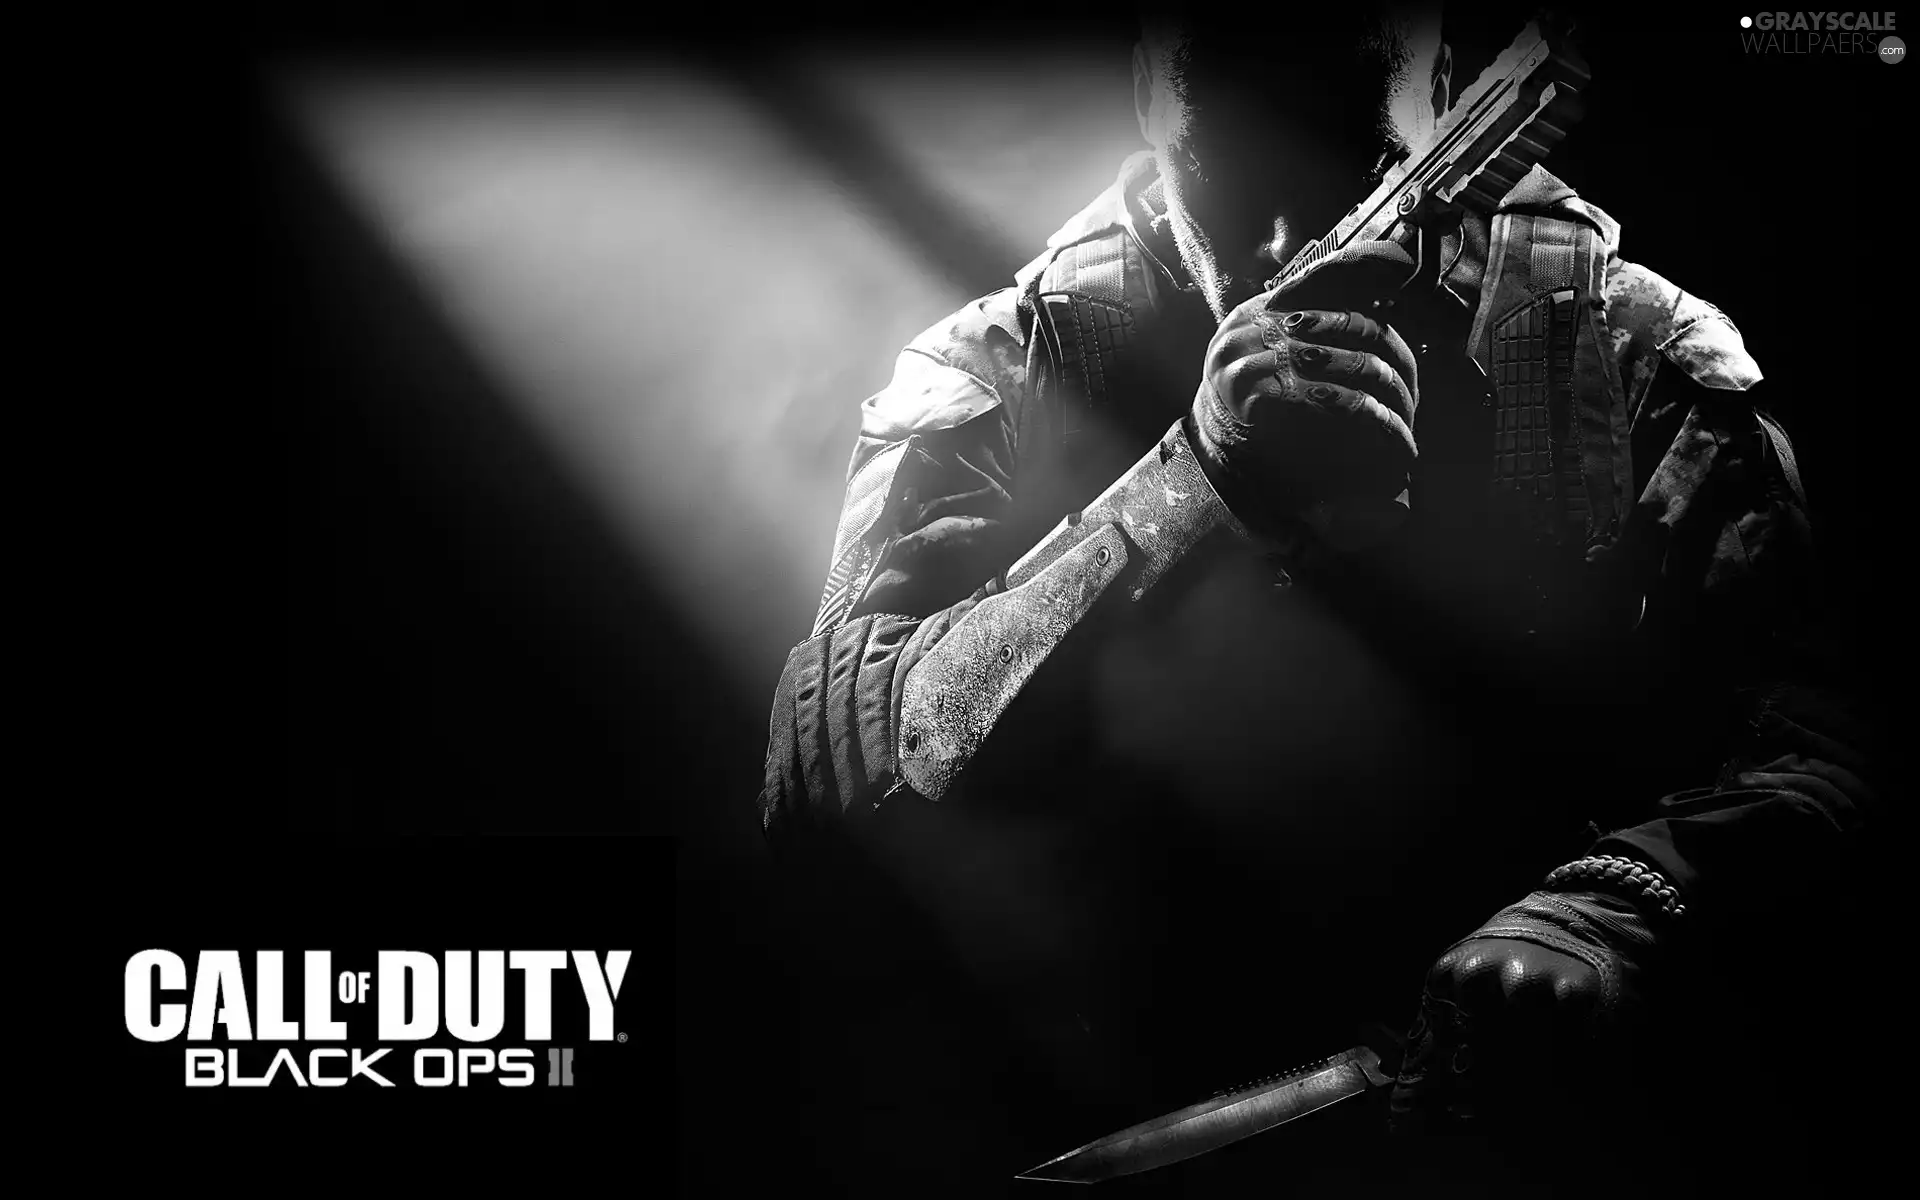 soldier, knife, Call of Duty Black Ops, Gun